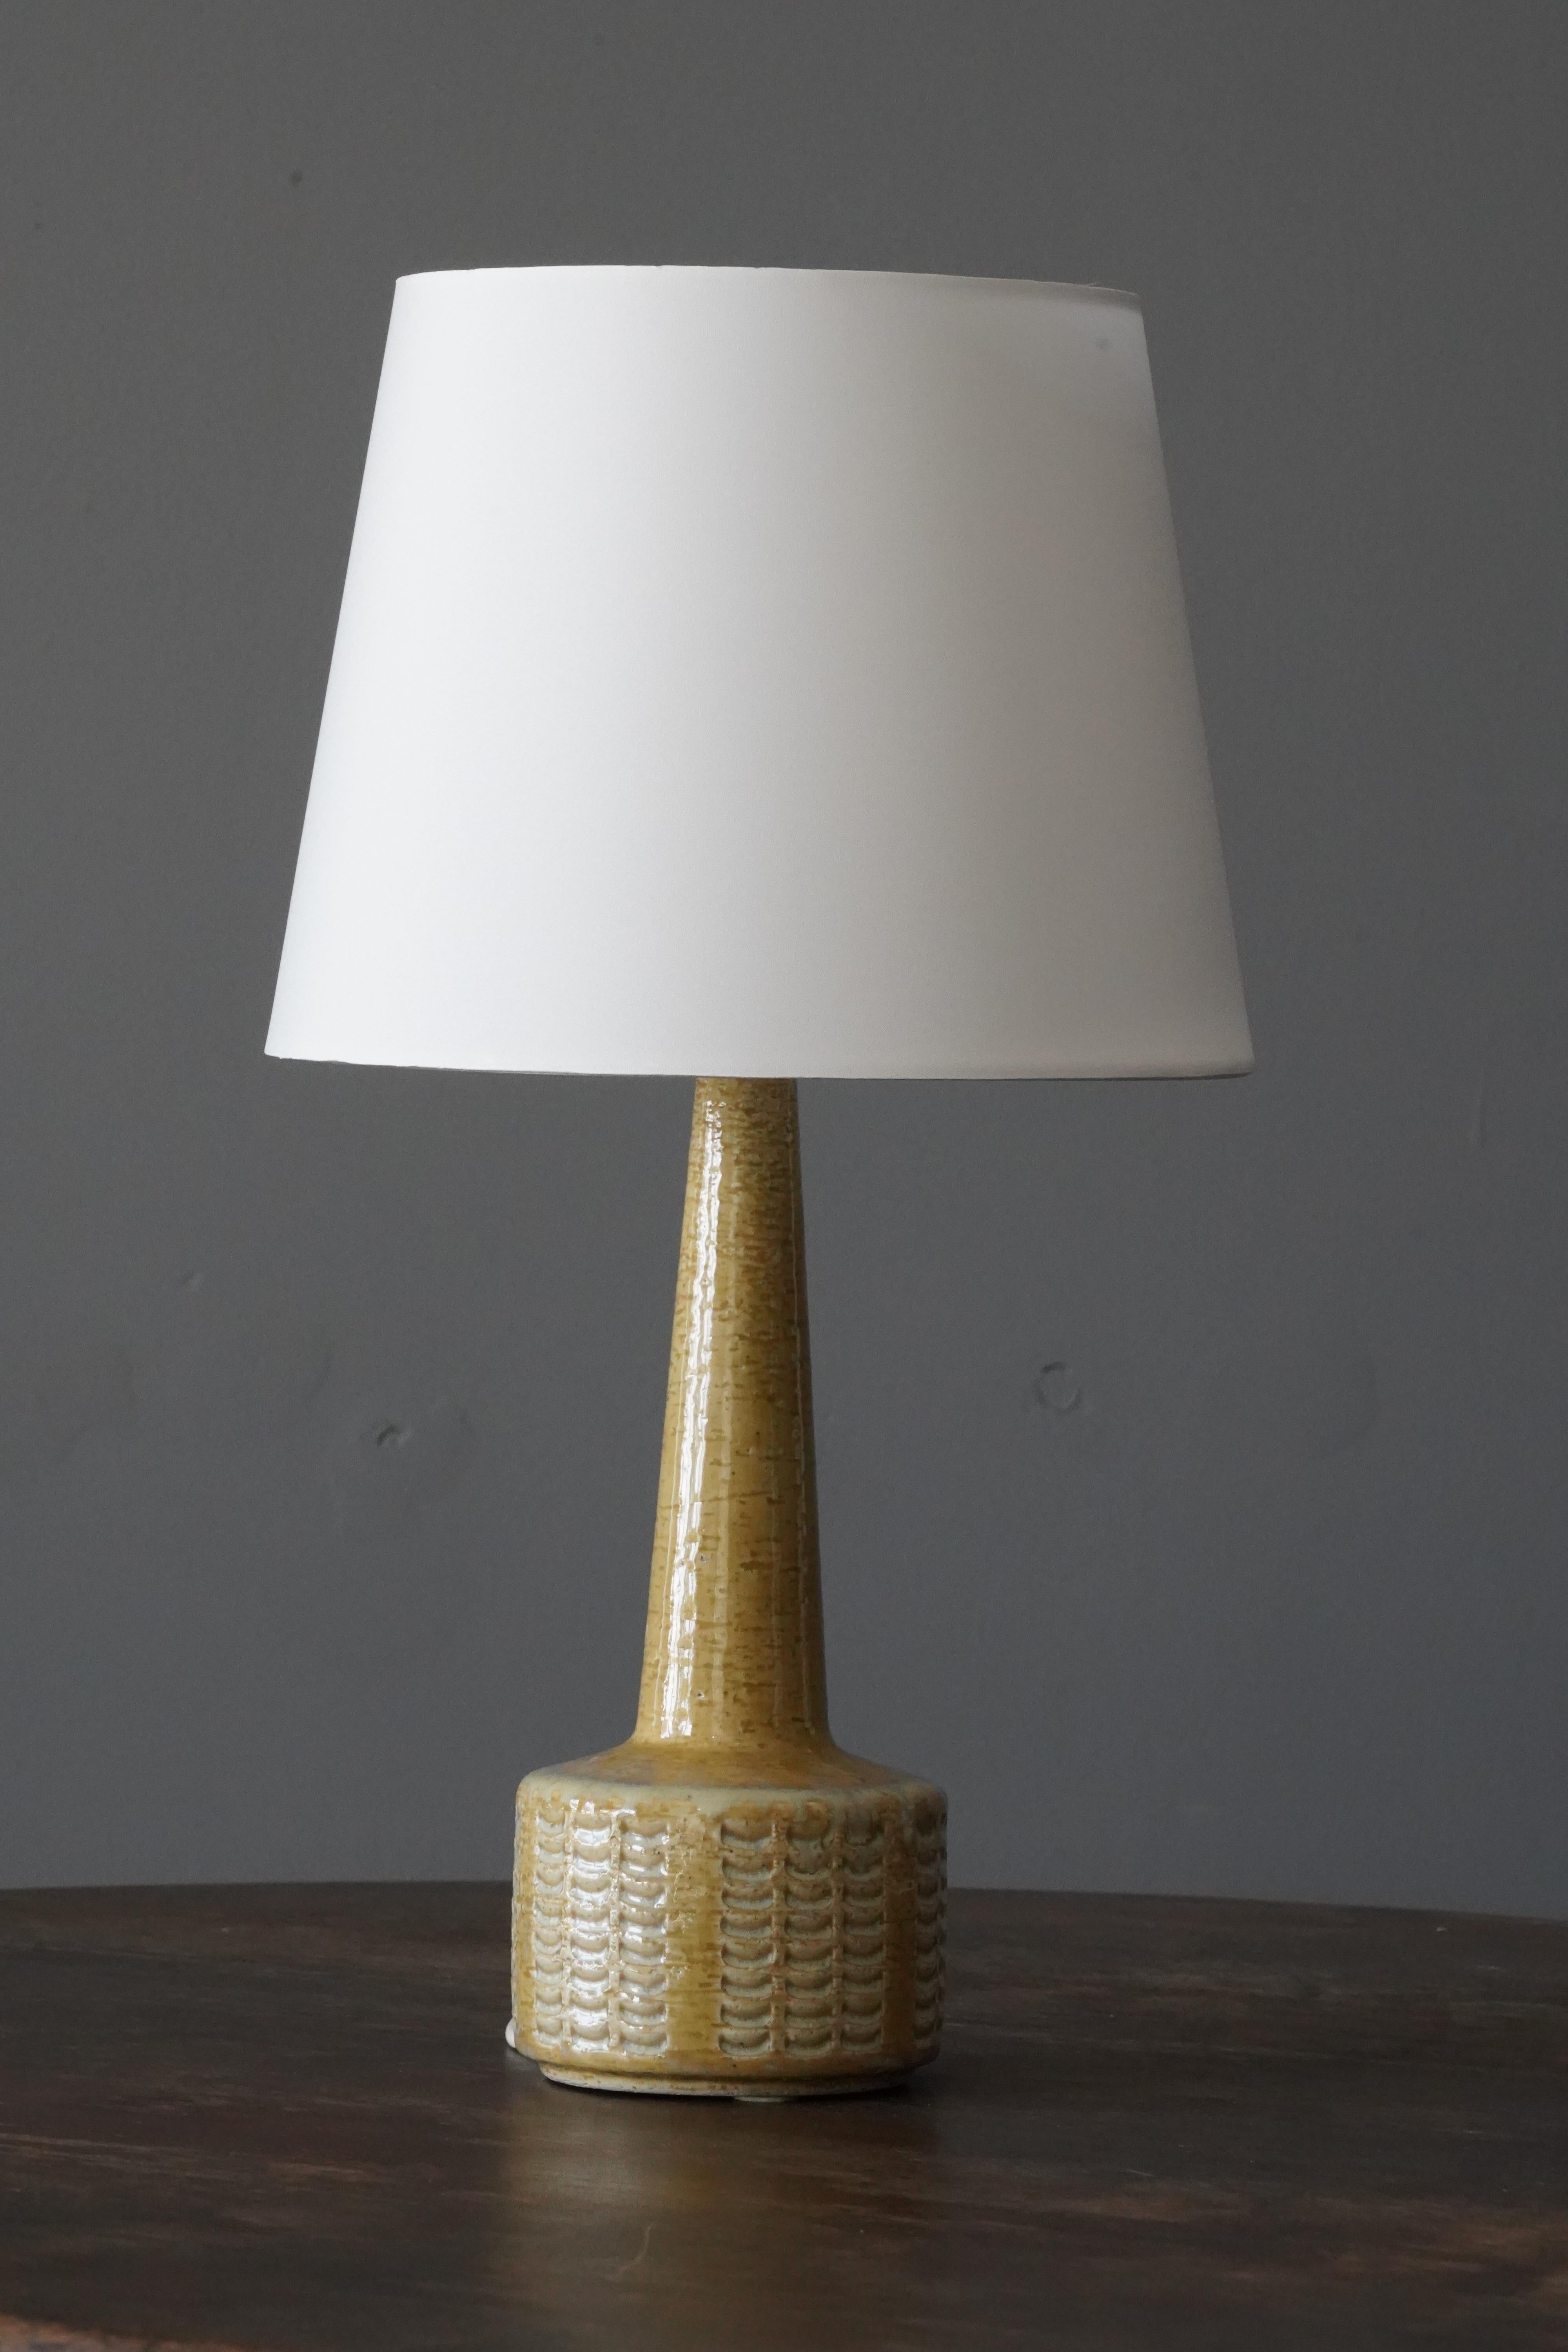 A table / desk lamp designed by husband and wife Per & Annelise Linneman-Schmidt. Handcast in firesand. Produced in their own Studio, named Palshus, in Sengeløse, Denmark. Signed. Features simple incised ornamentation.

Sold without lampshade.